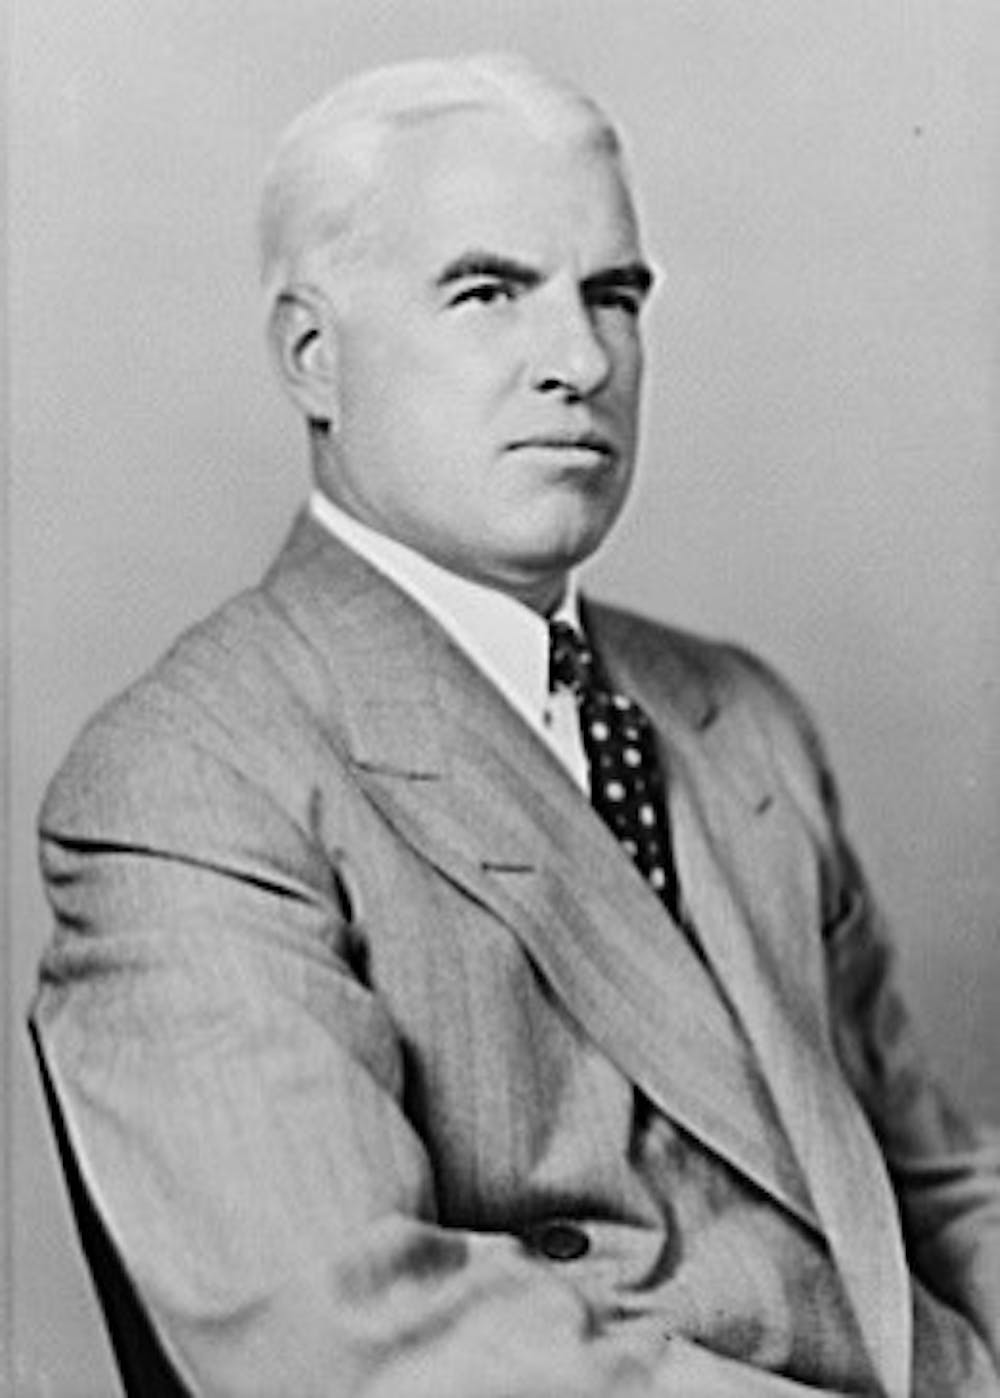 Stettinius was named the first U.S. Ambassador to the United Nations, but left his post in 1946, and became rector at the University until his death in 1949.